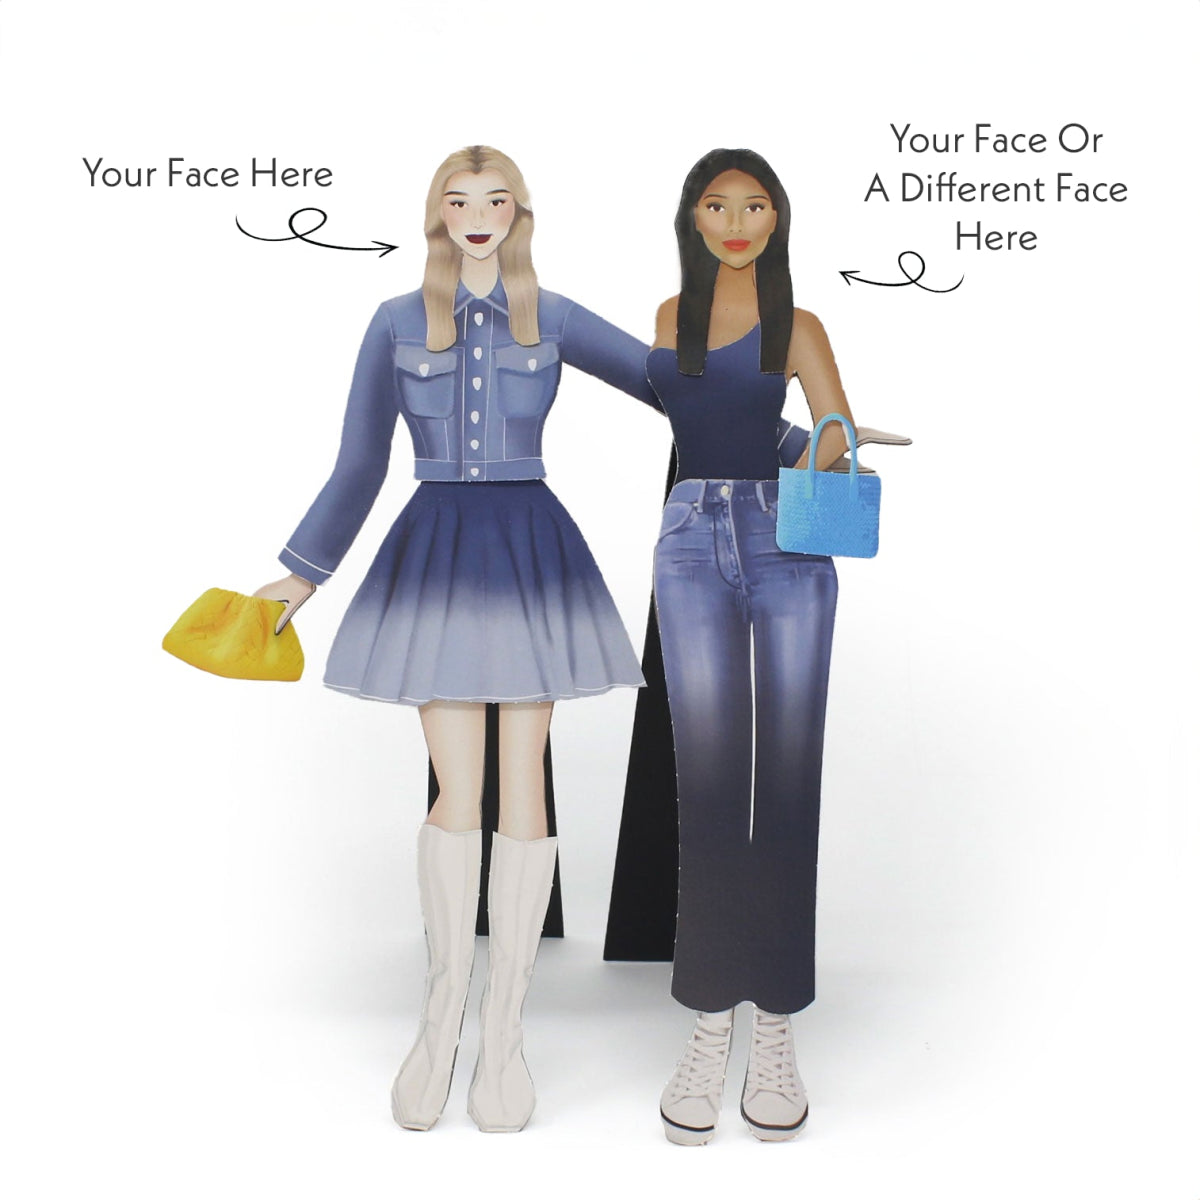 Personalized Paper Dolls